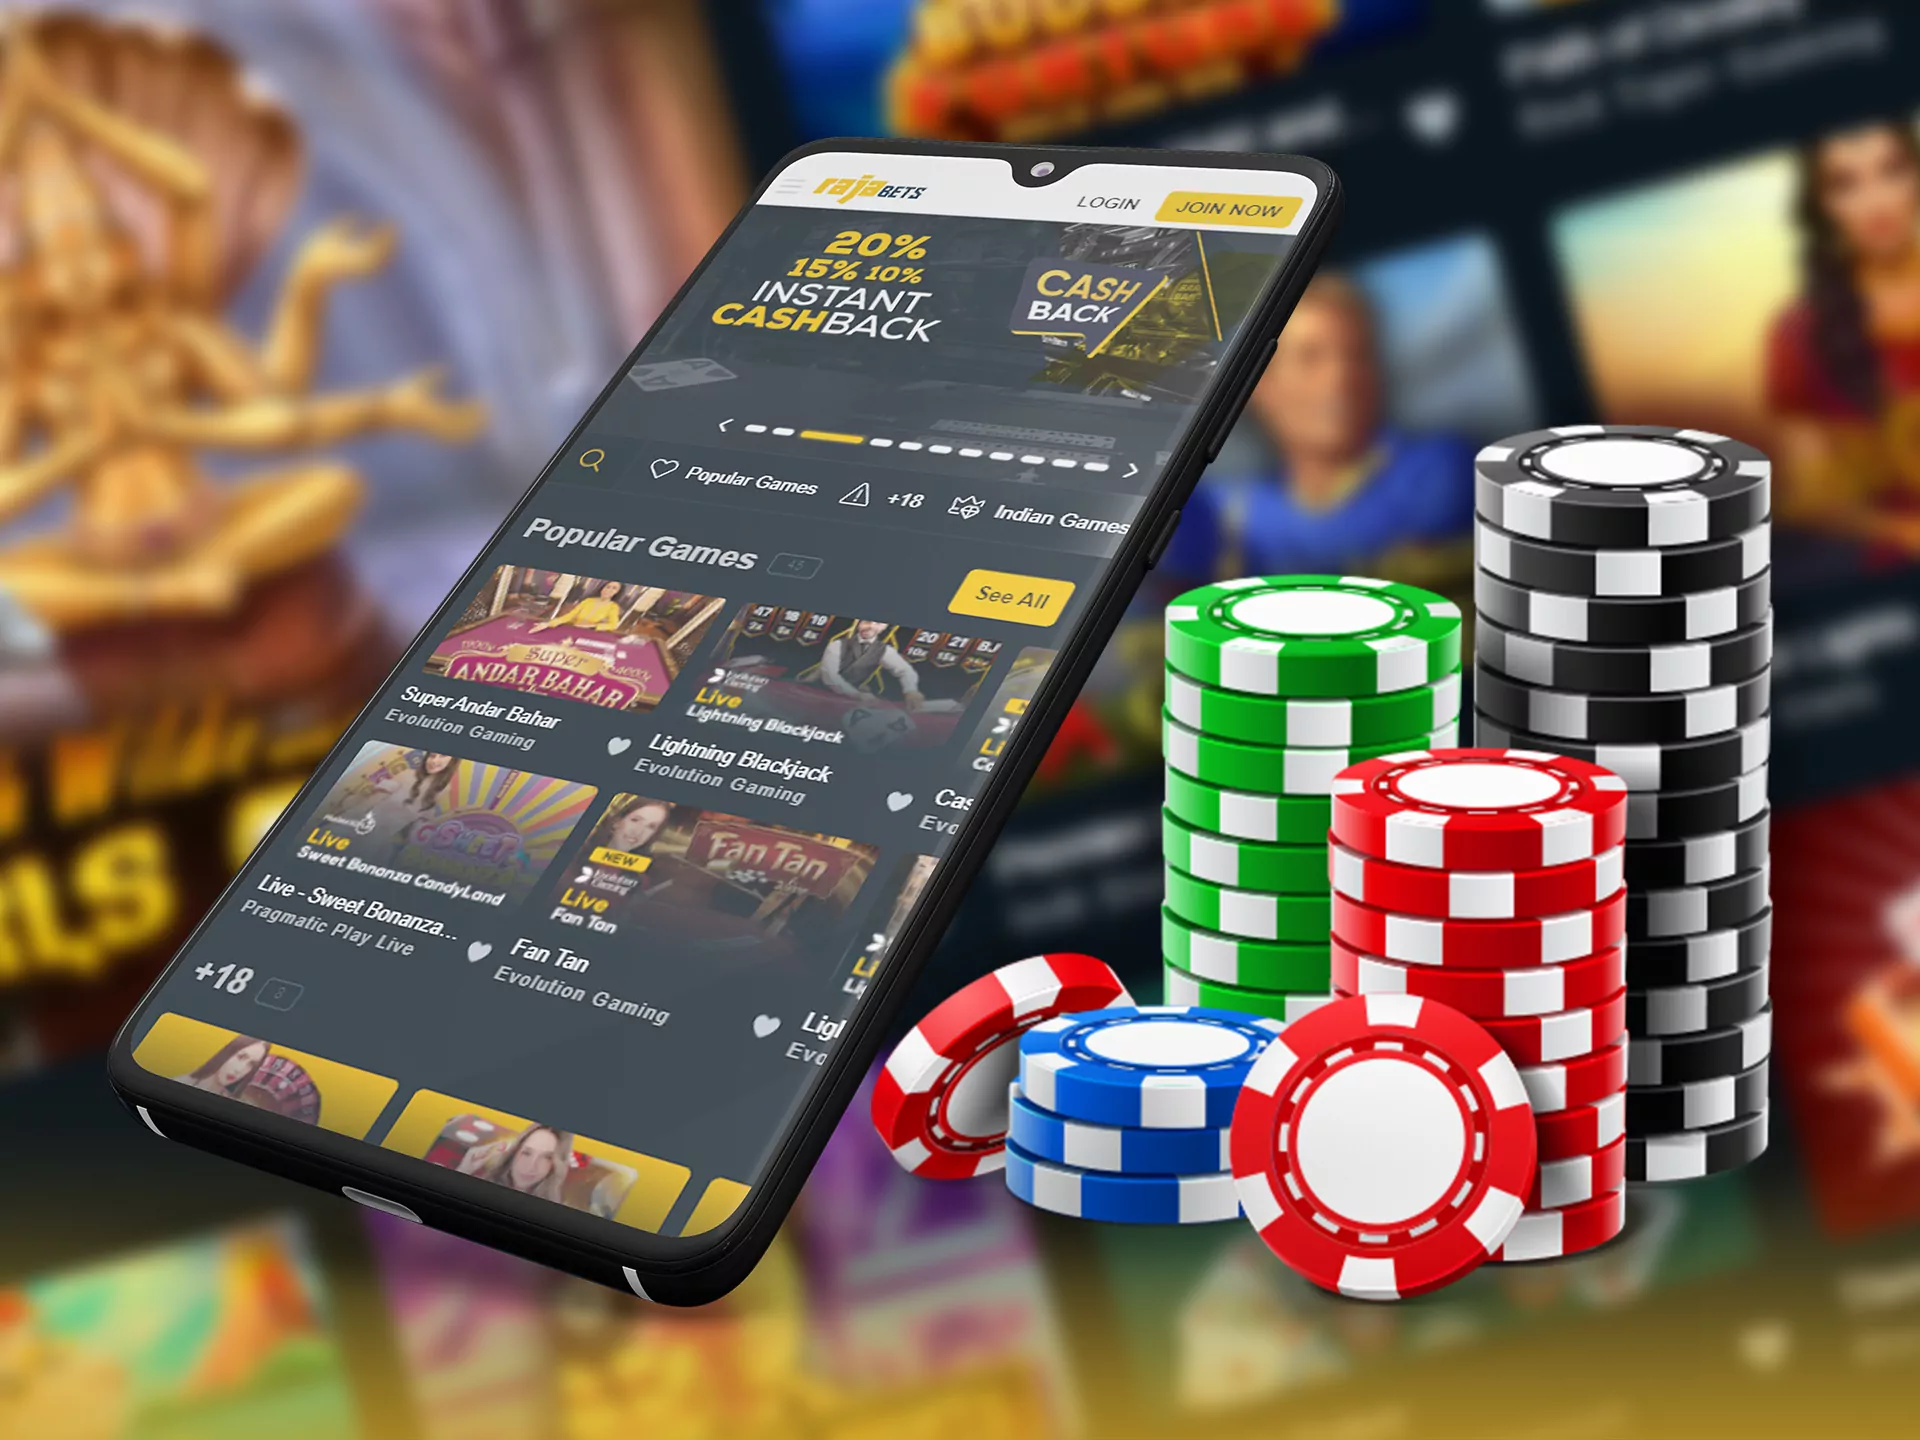 Play and win pig prizes at Rajabets casino app.